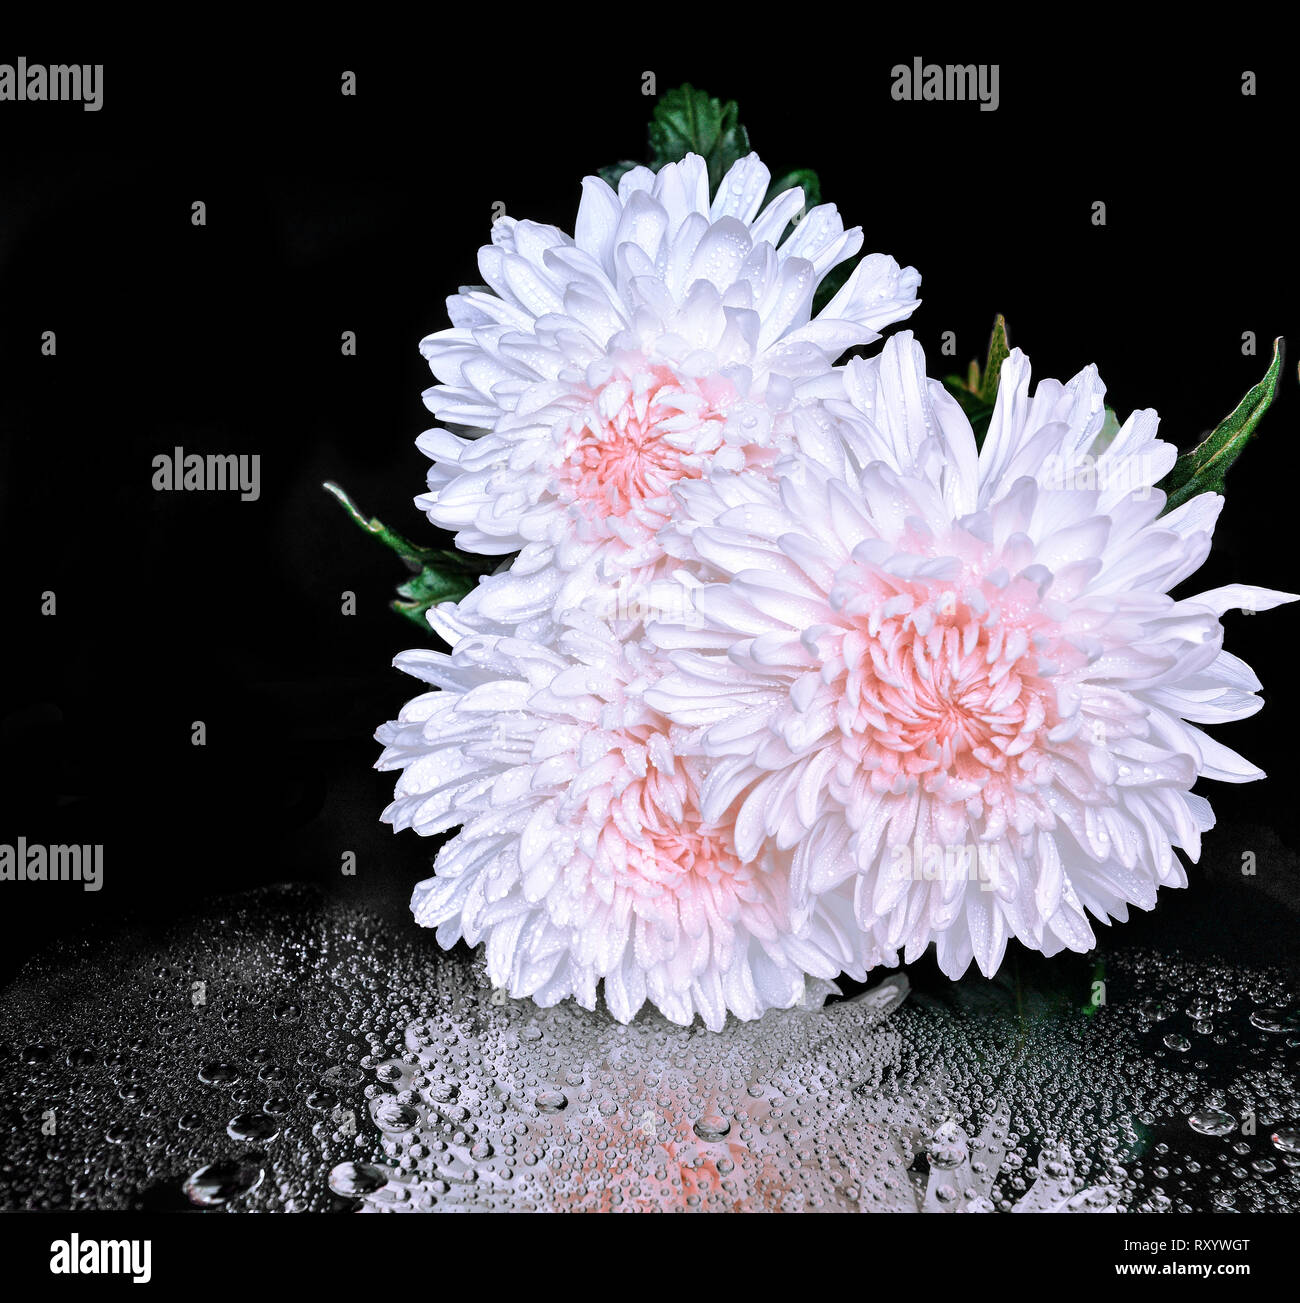 Three white dew chrysanthemum flowers with pink center on black background with water drops and reflection. Concept of purity, harmony and freshness f Stock Photo